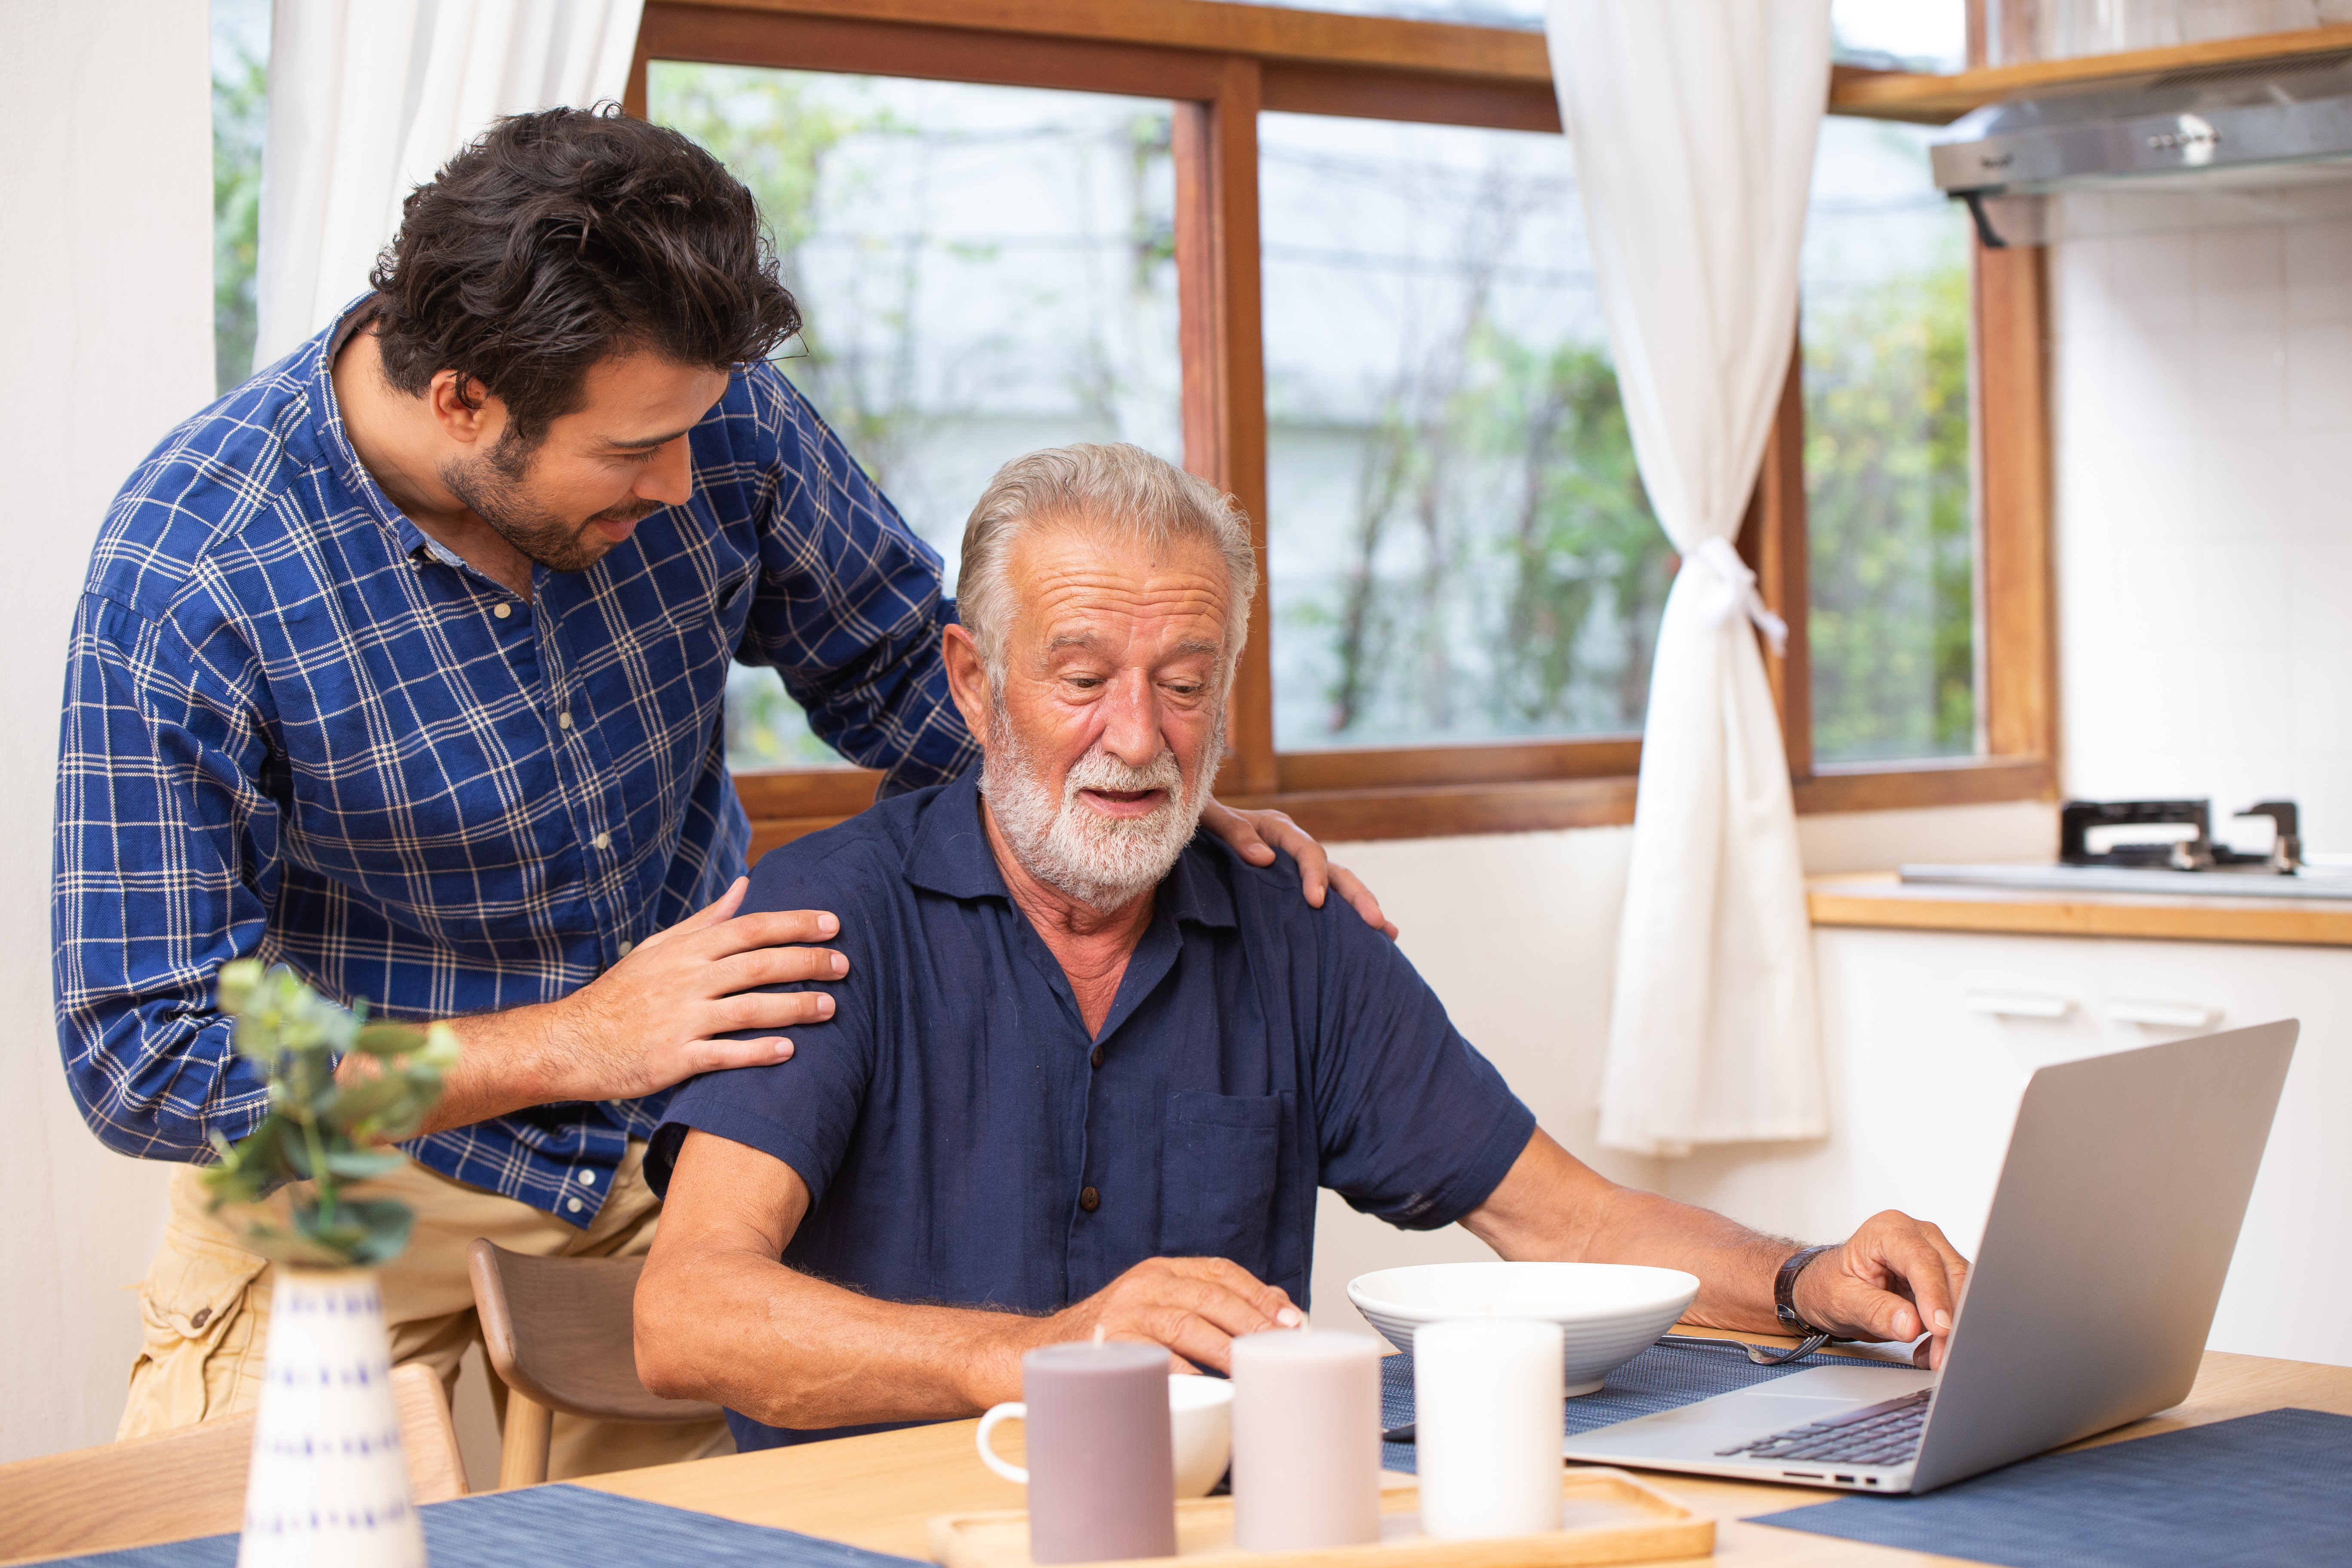 Elder care in home, good mentor healthy smart old man using laptop computer stay at young man.